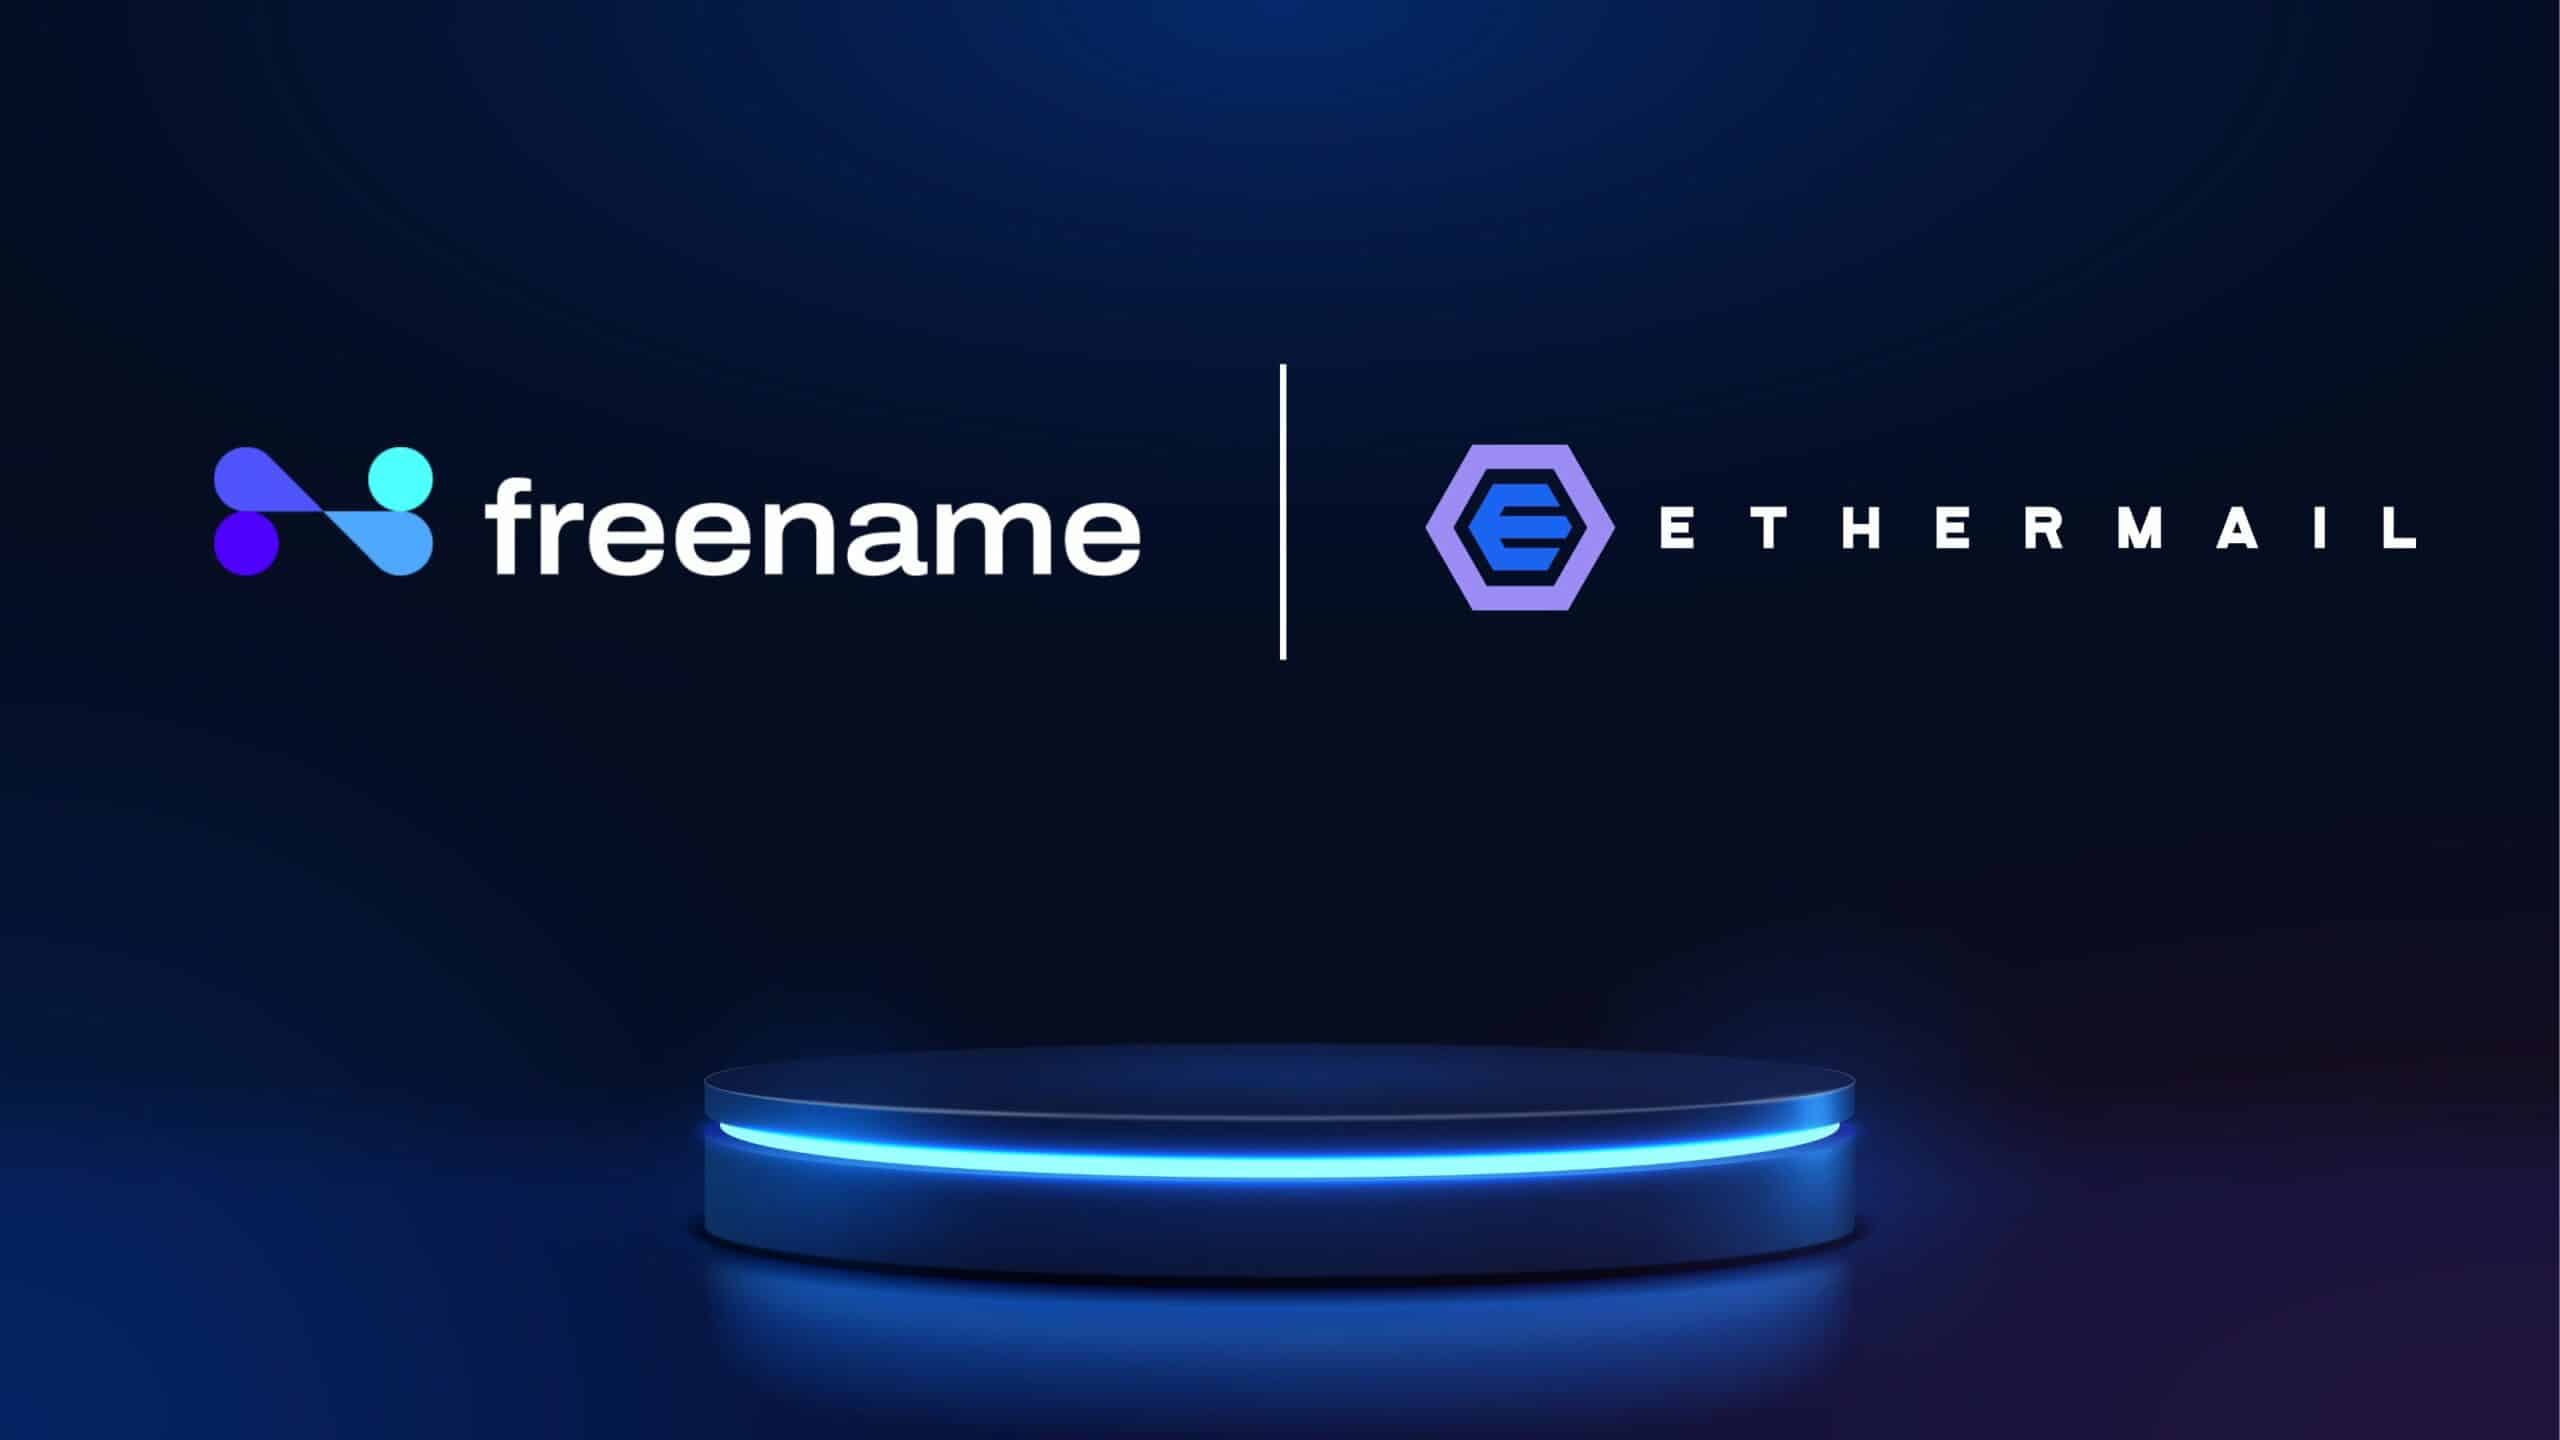 EtherMail Announces Integration with Freename in Latest Web3 Email Milestone